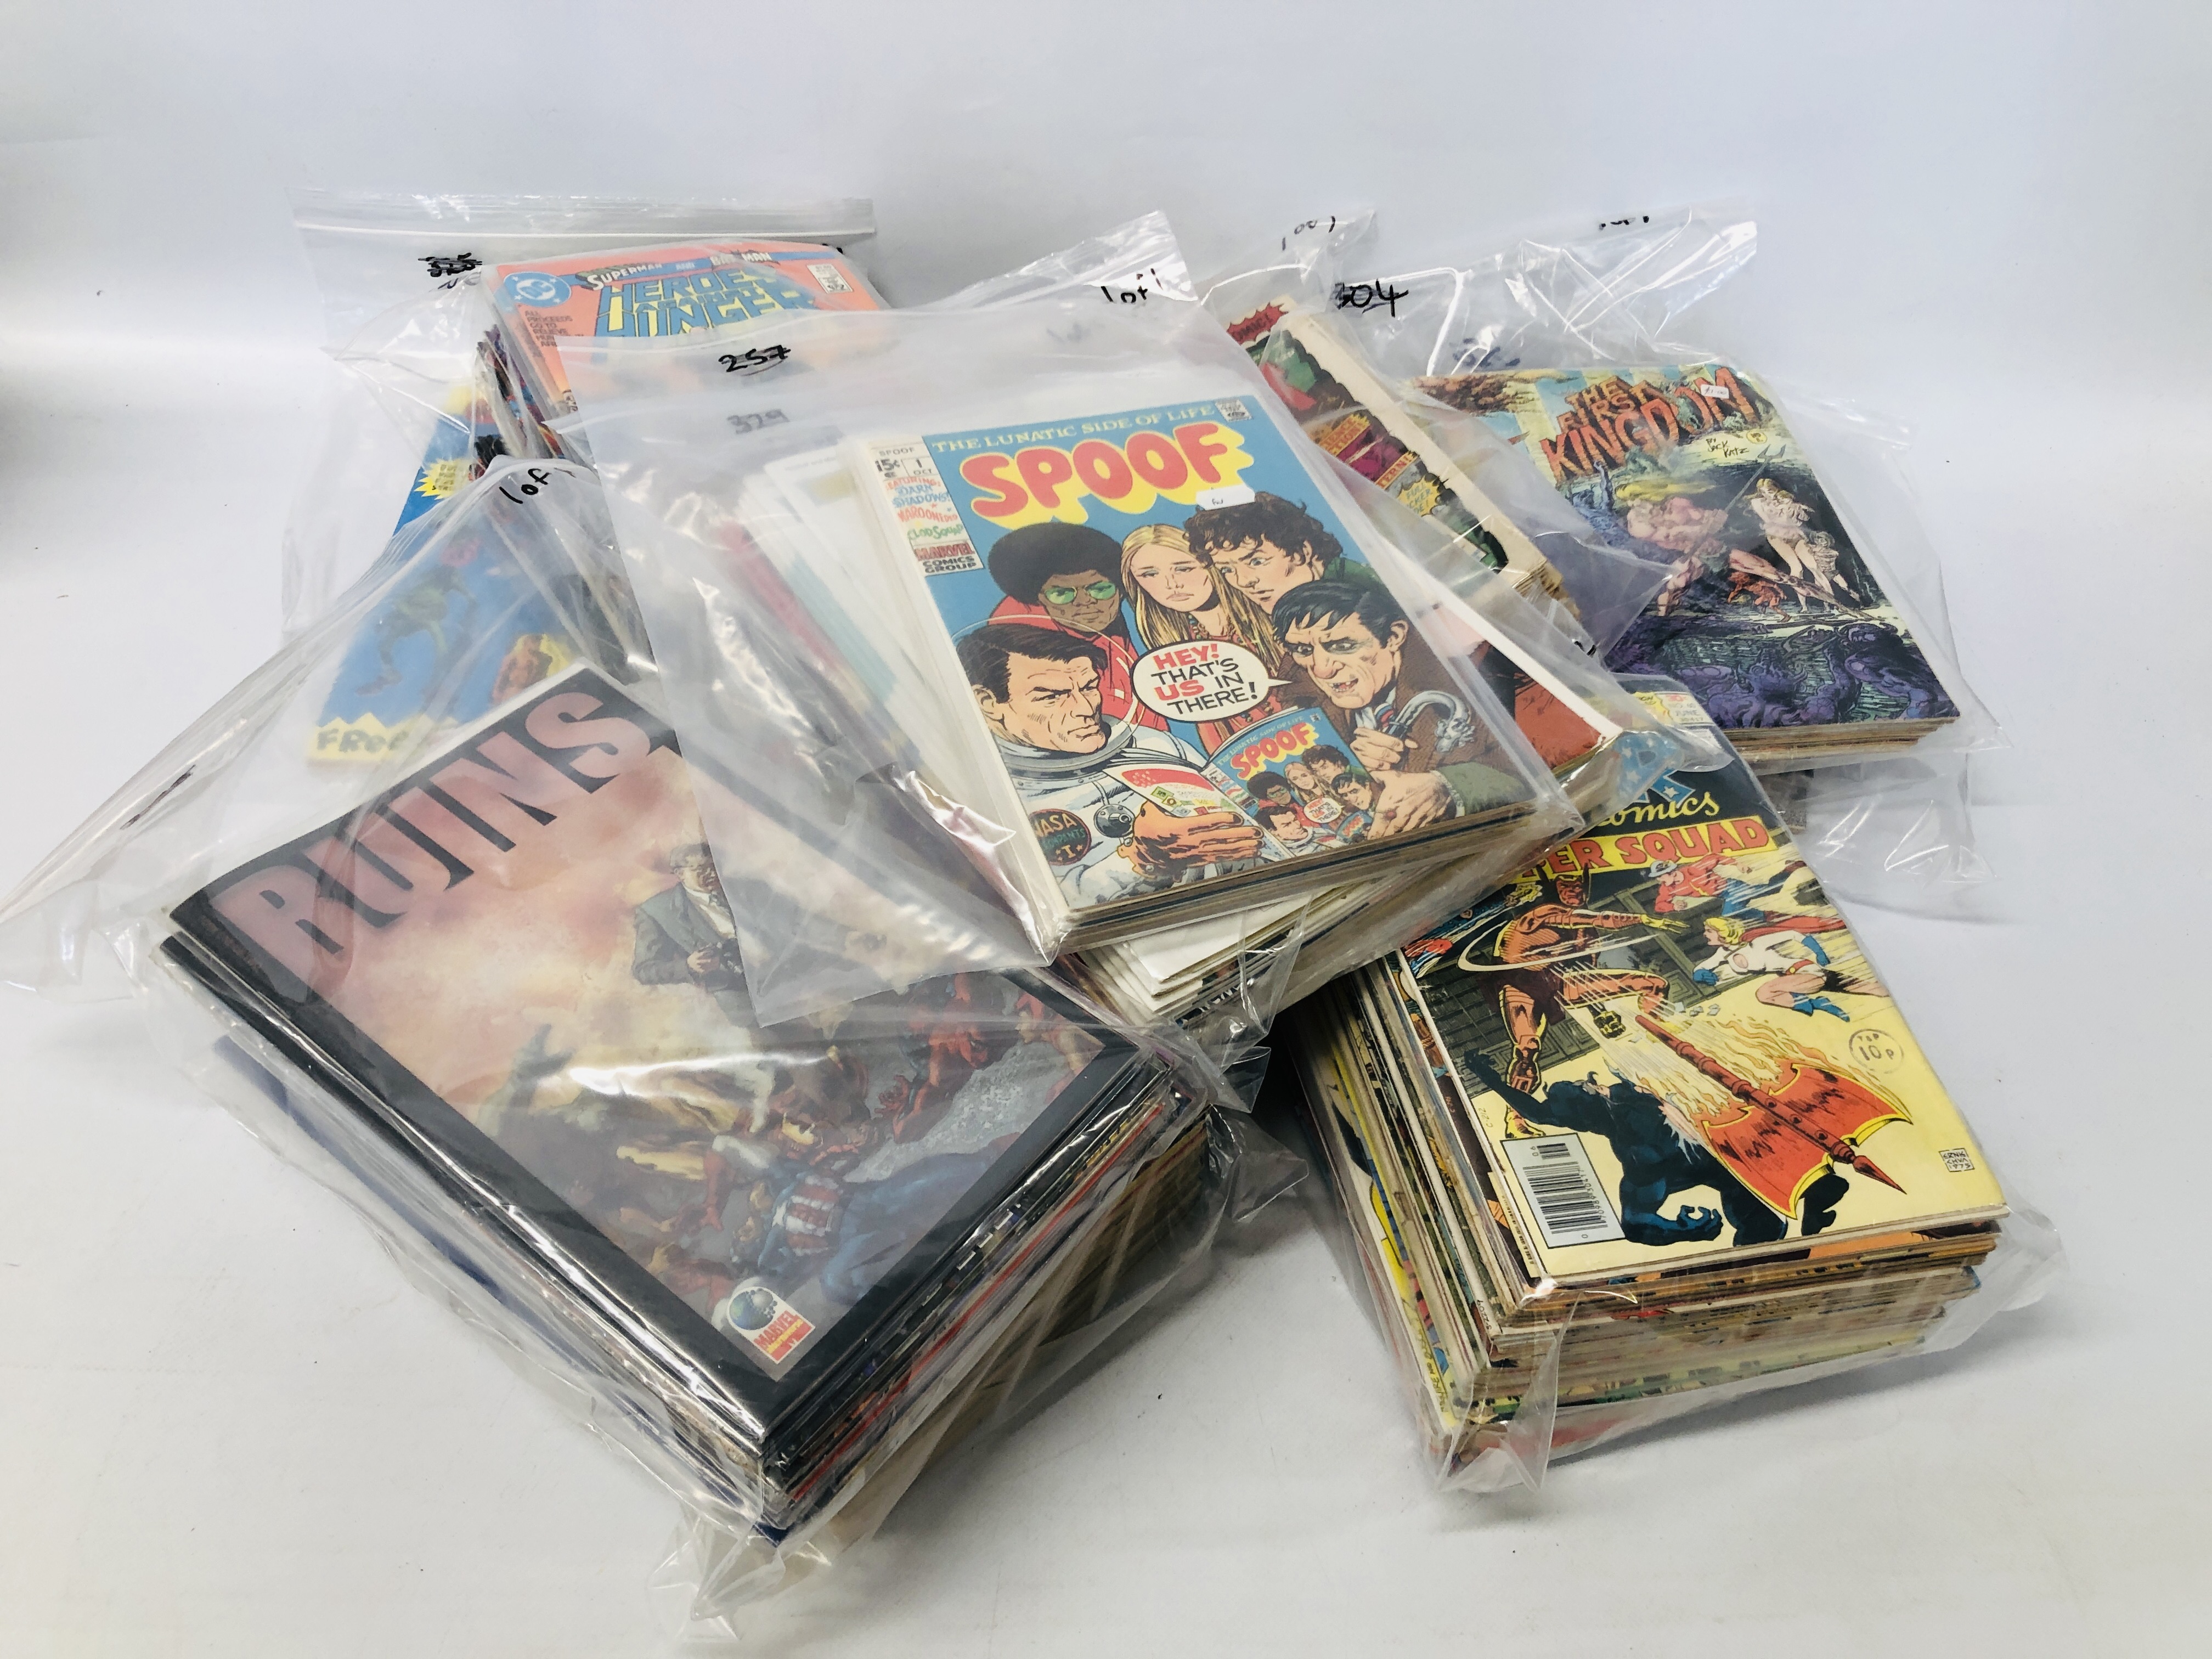 A COLLECTION OF COMICS TO INCLUDE COLLECTION OF MARVEL COMICS INCLUDING: MARVELS 1994,